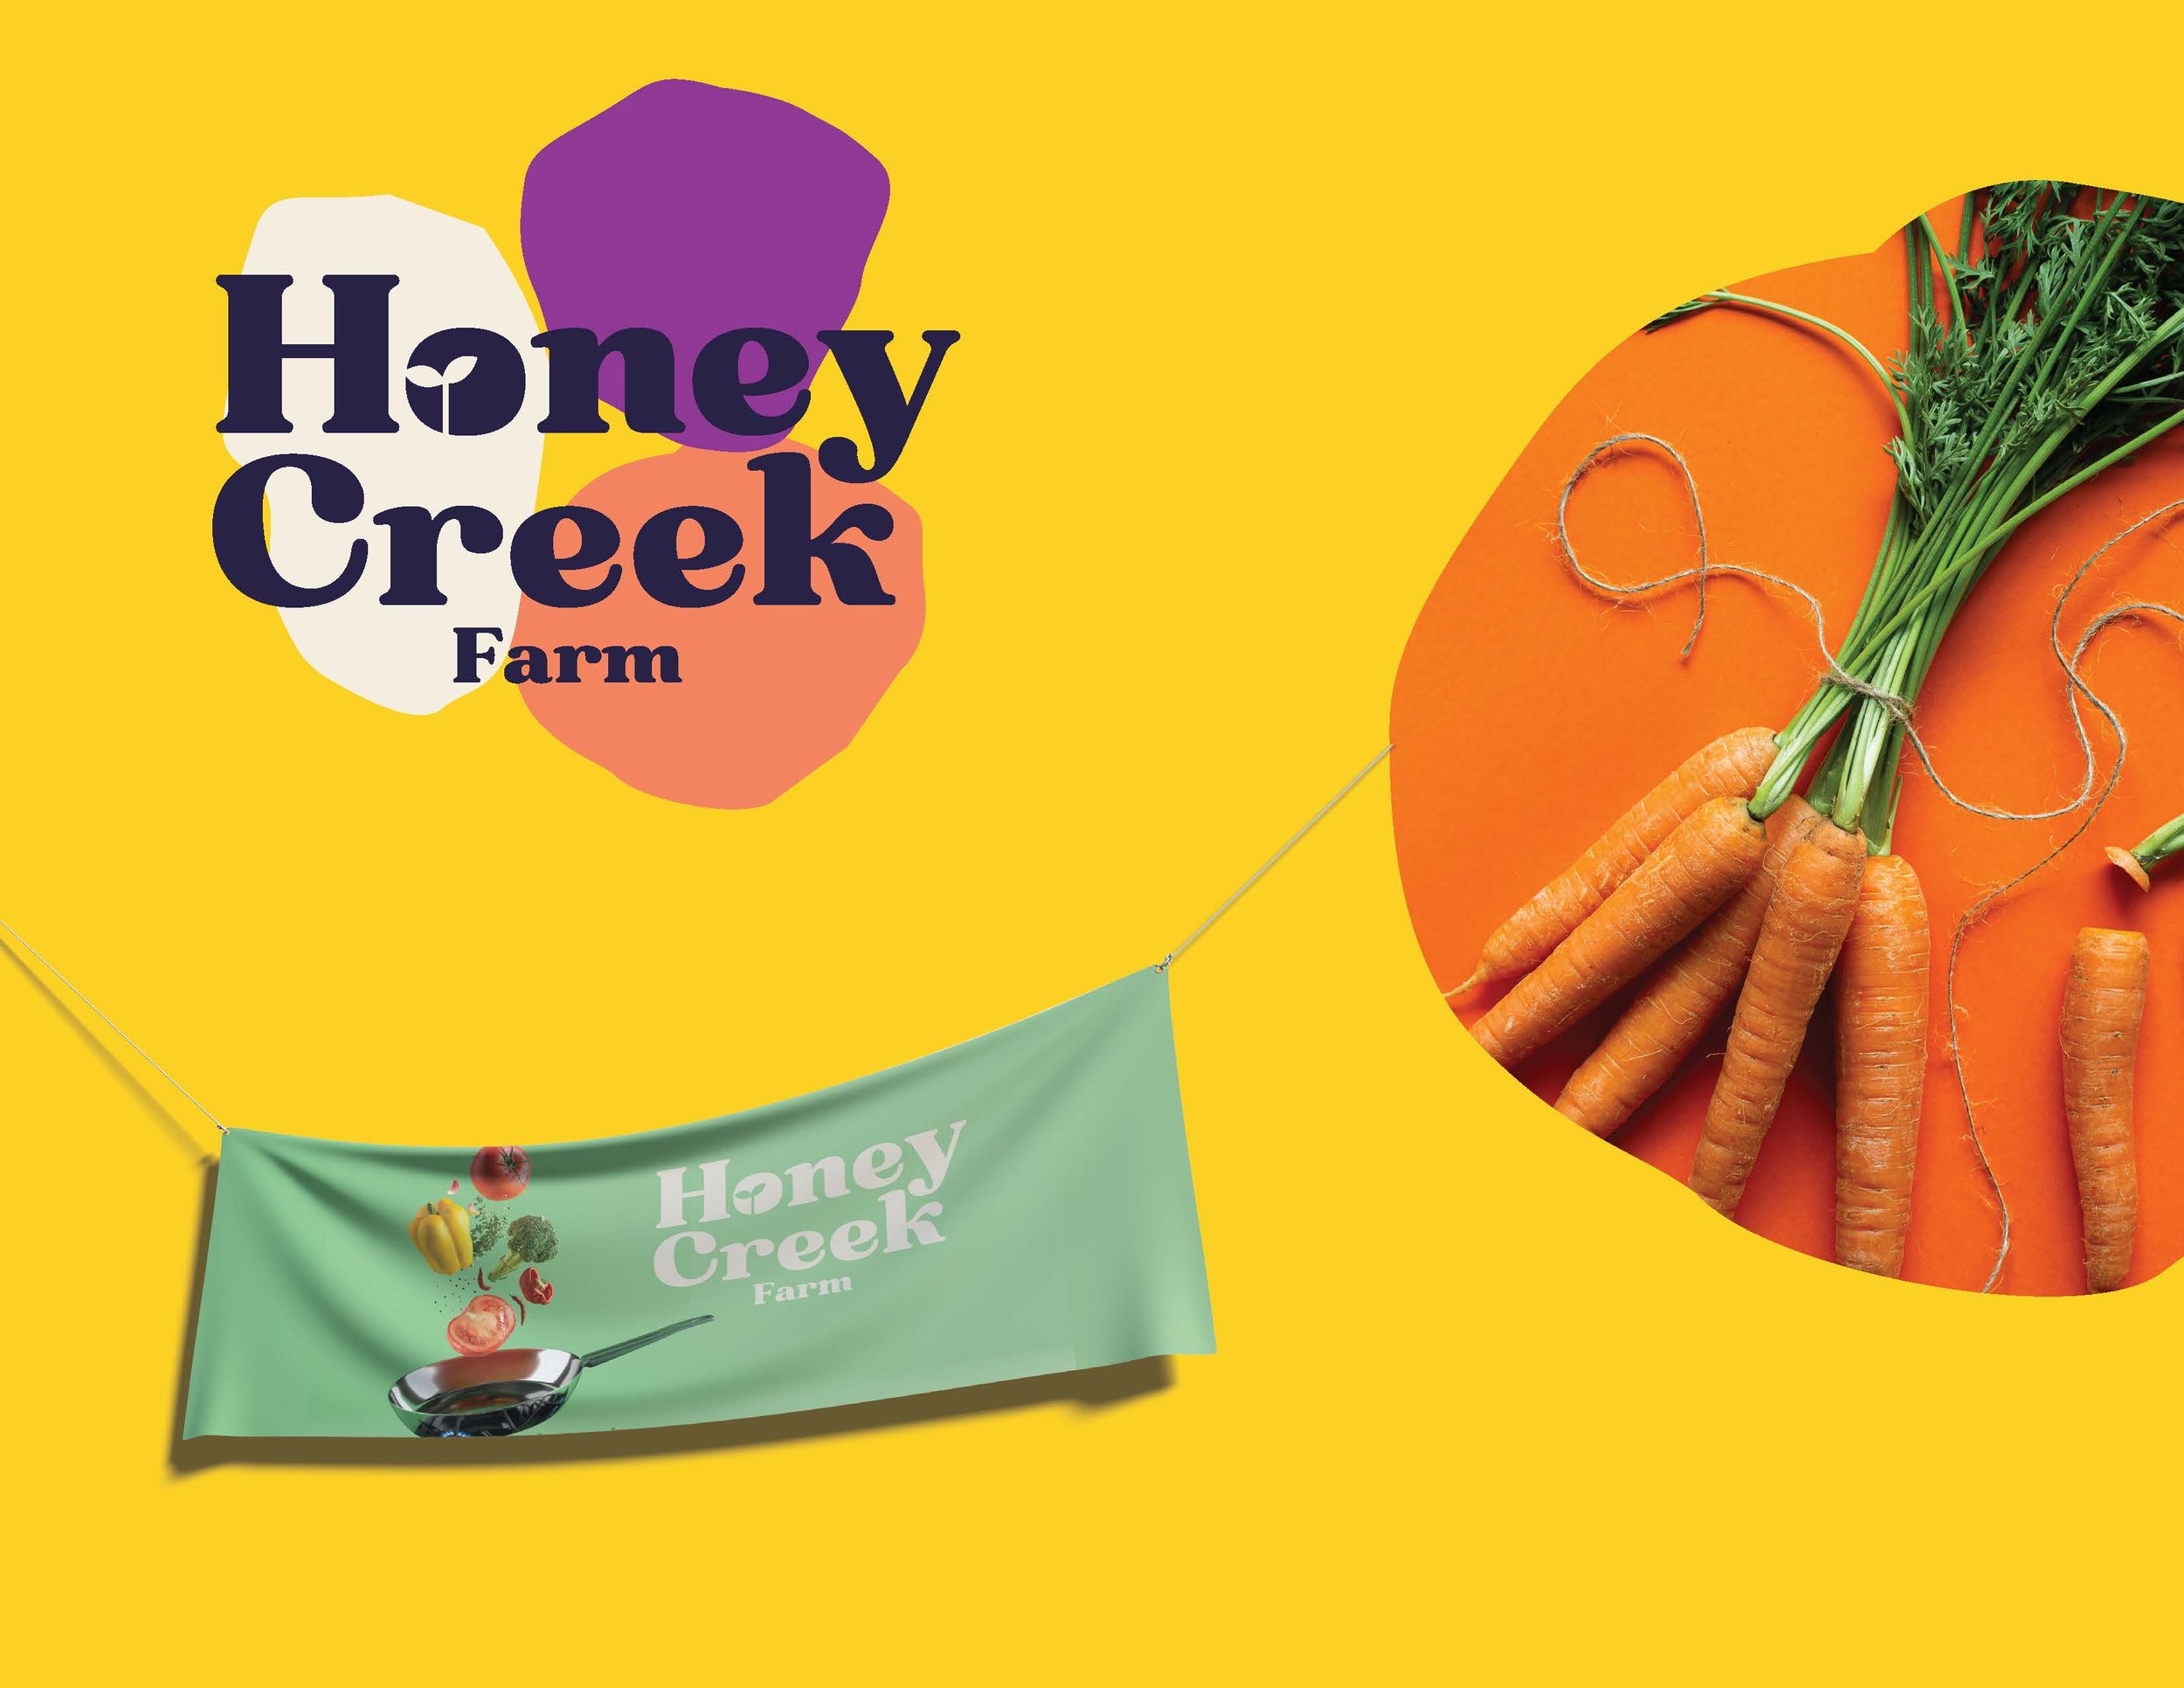  Honey Creek Farm logo overlayed on colorful circles with an advertising banner mock-up and photo of carrots. 